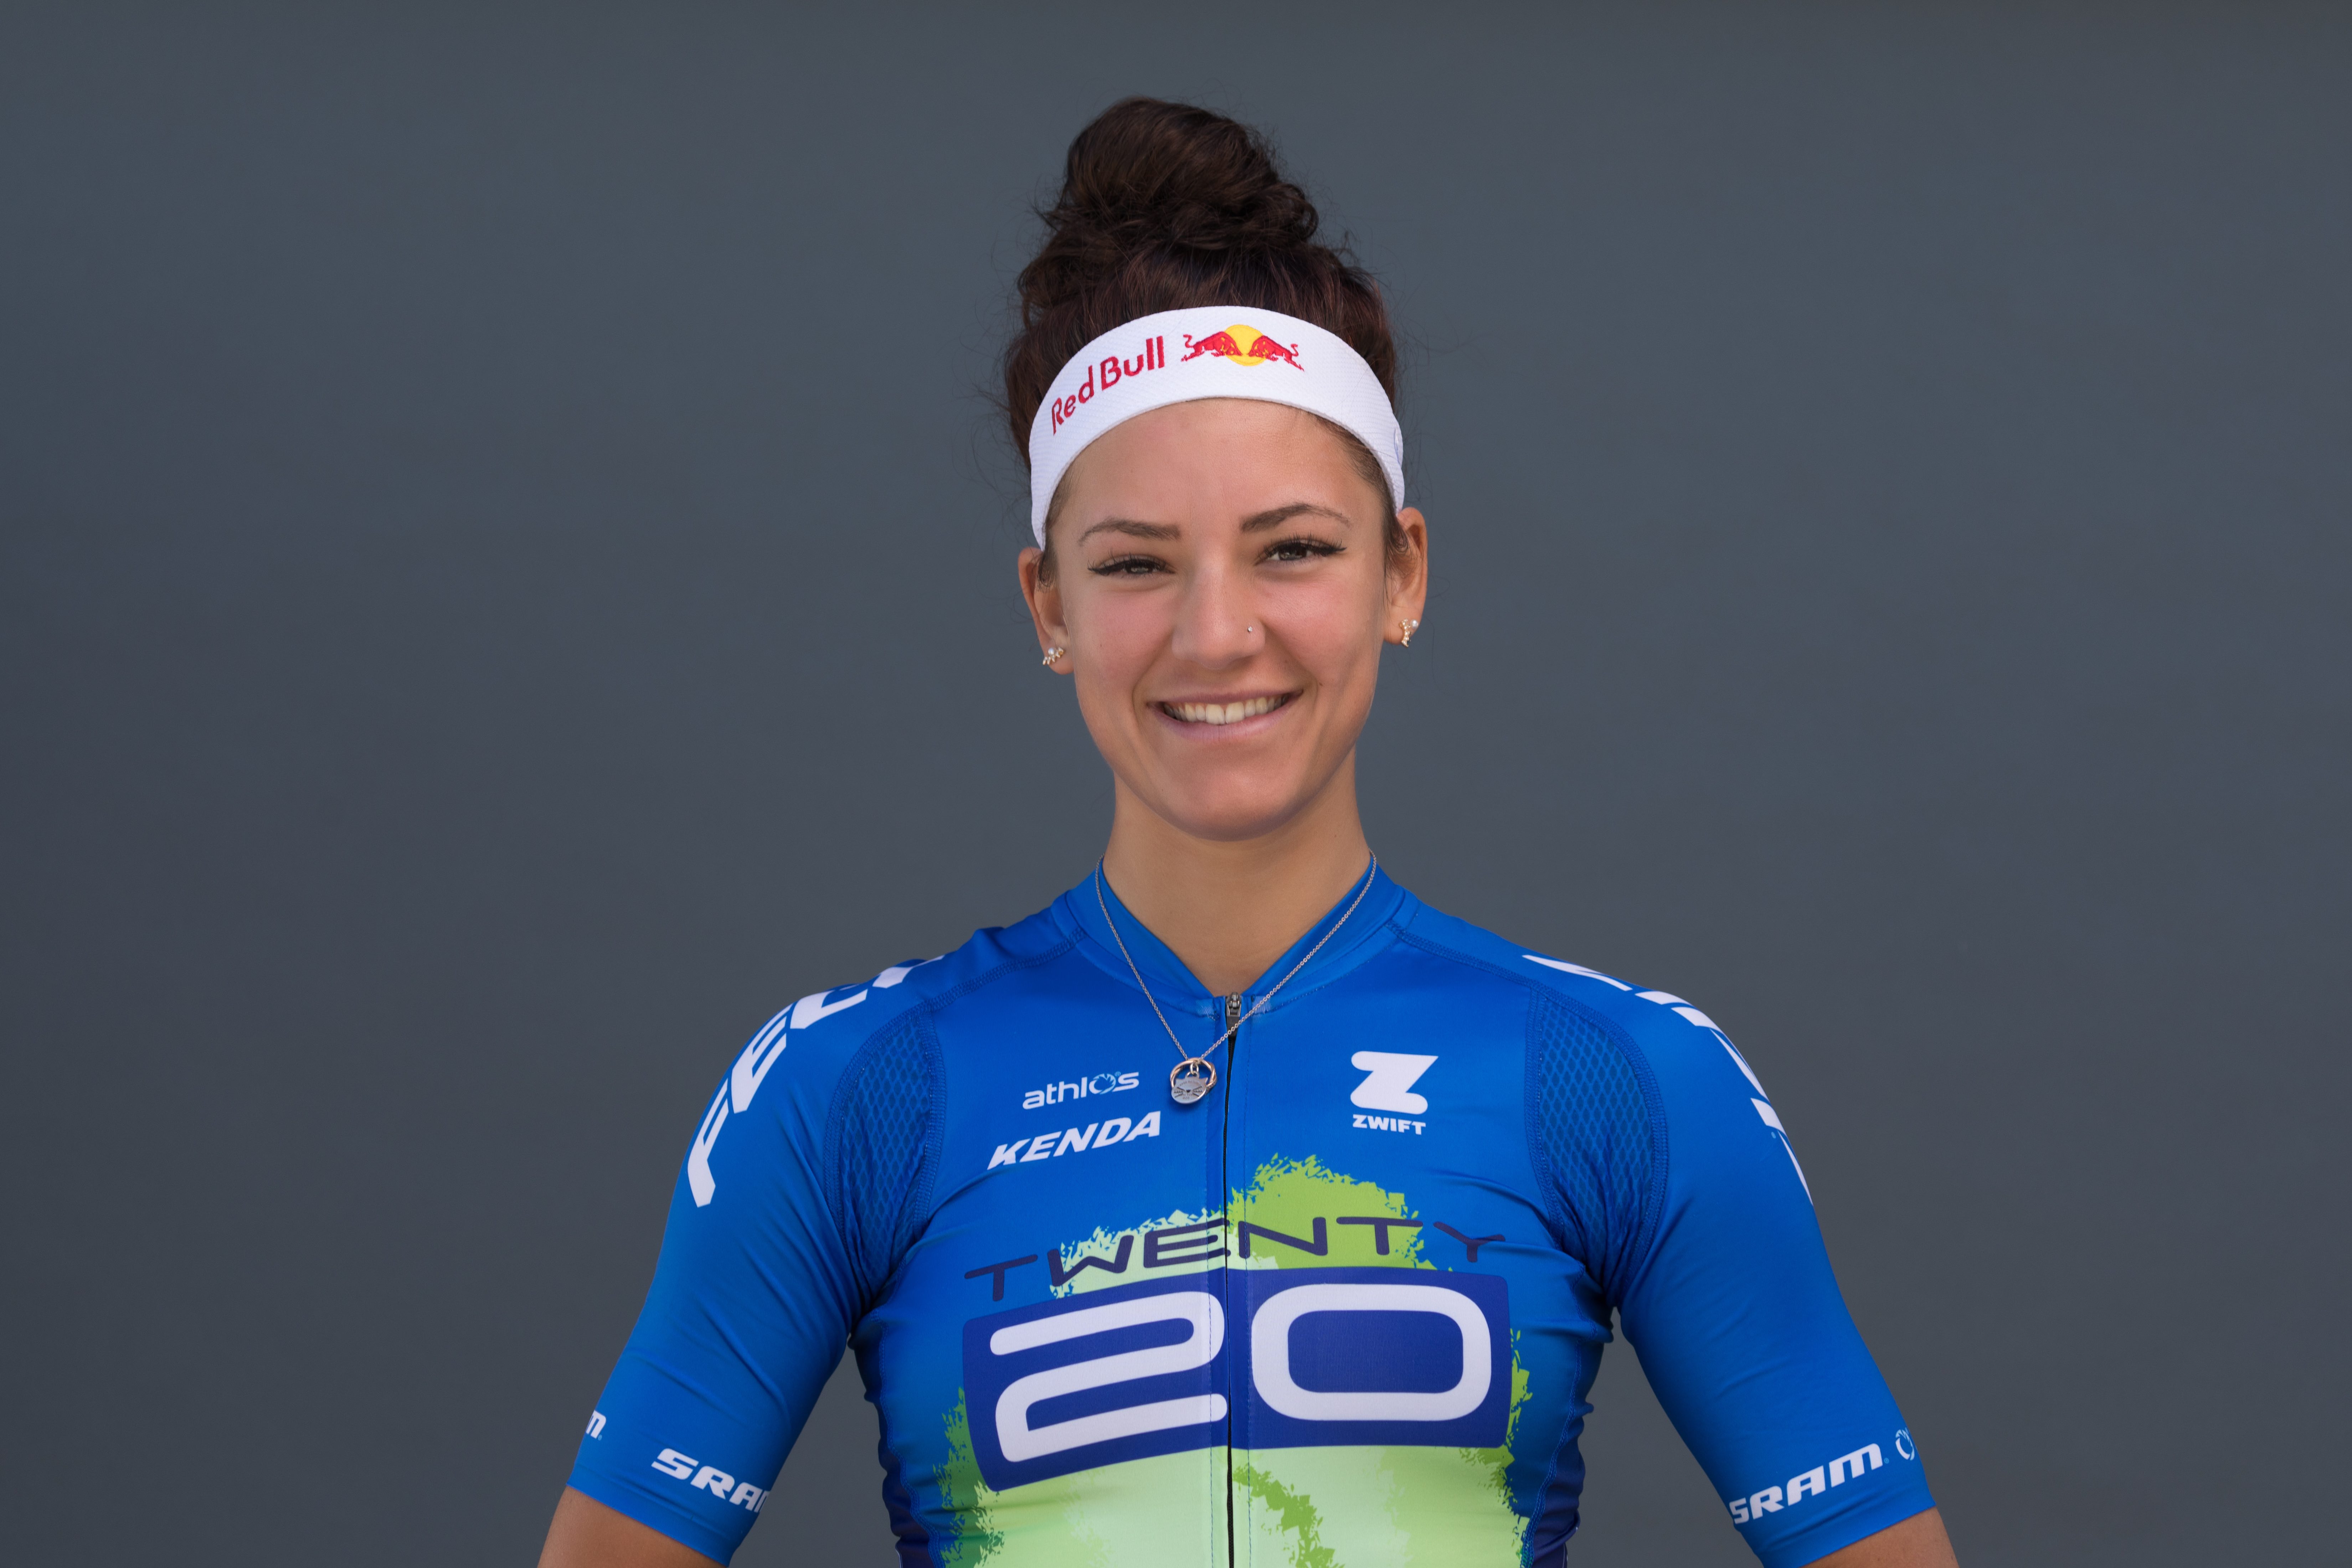 Chloe Dygert Makes Surprise Transfer To Canyon Sram In 2021 Cyclingnews 2509